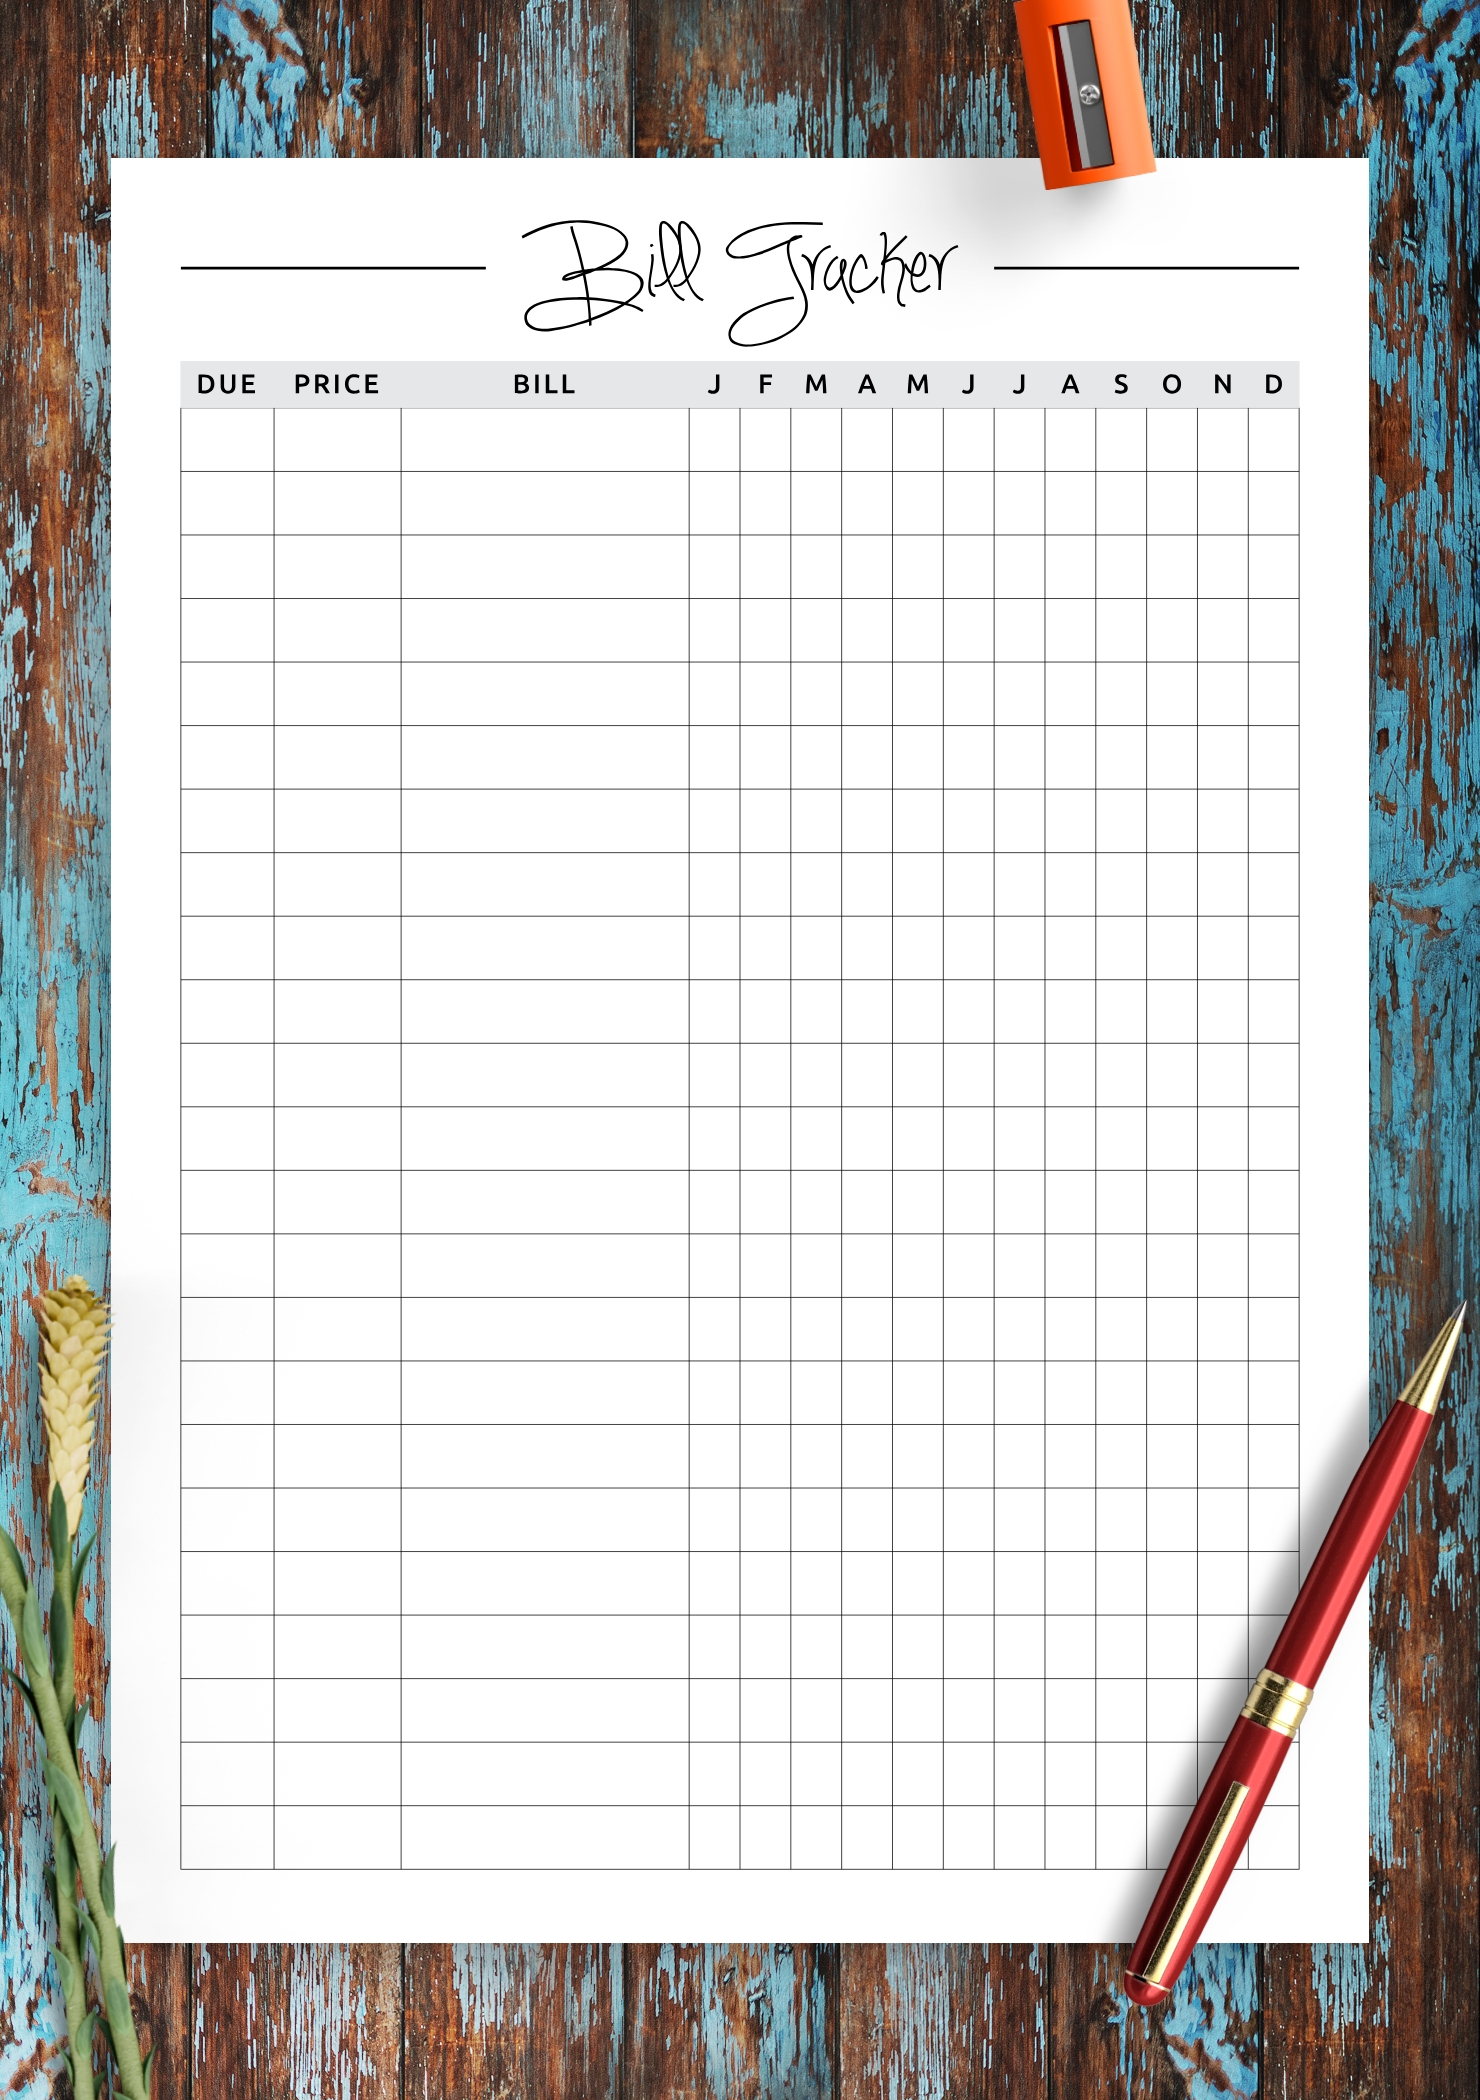 Fillable Monthly Bill Payment Worksheet Pdf - Template  Free Printable Bill Pay Sheets